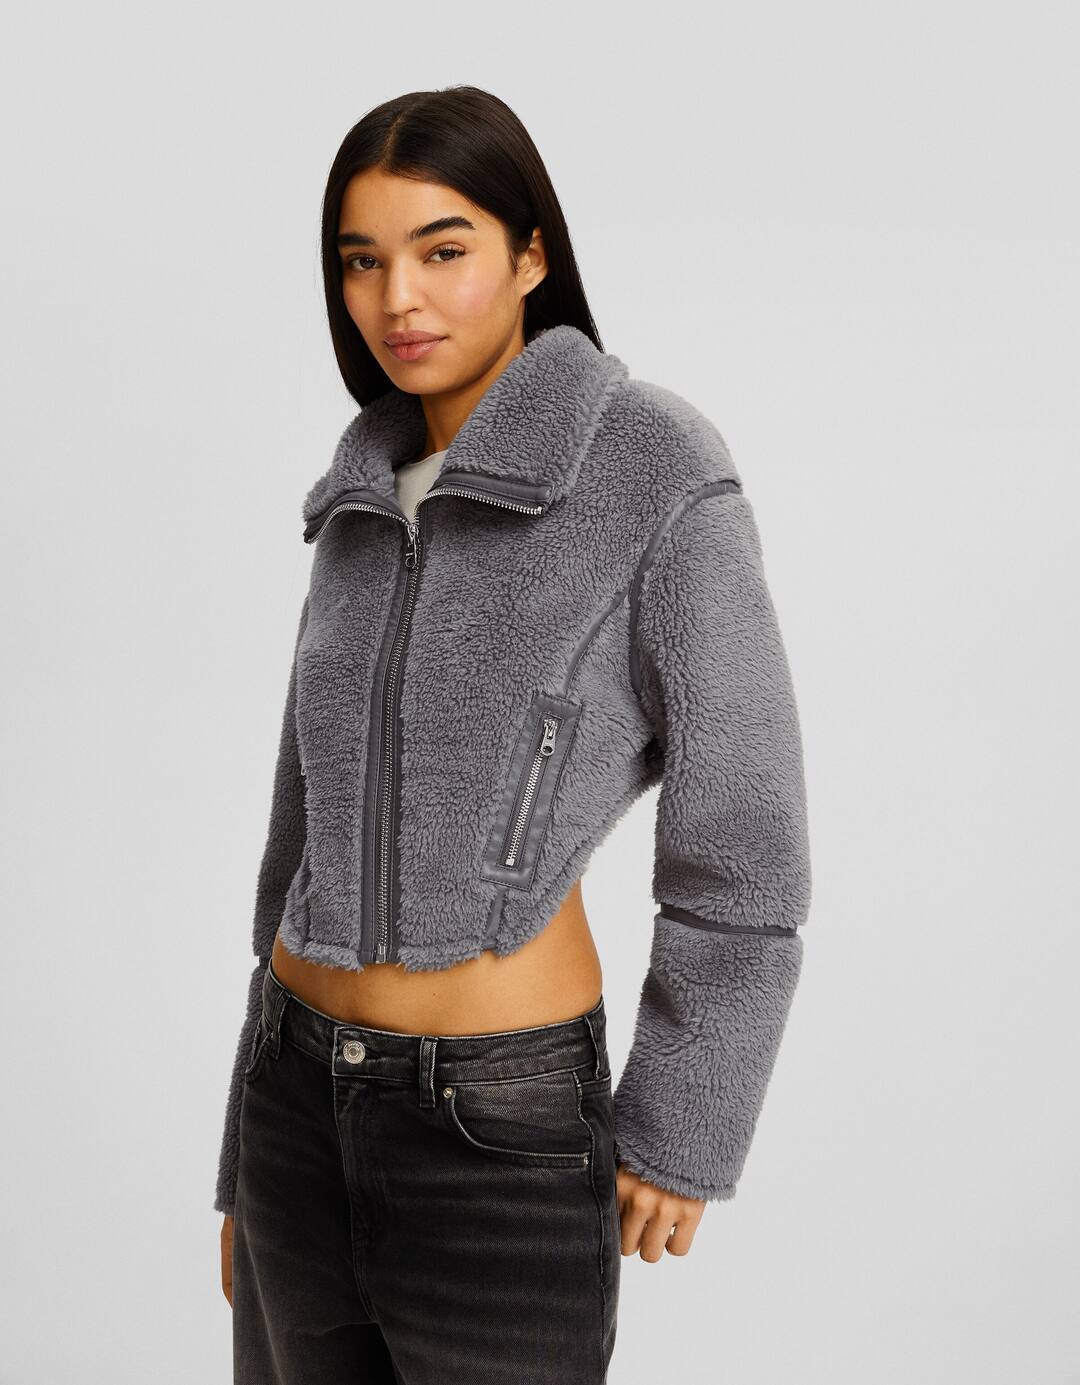 Bodysuit-effect jacket with faux shearling